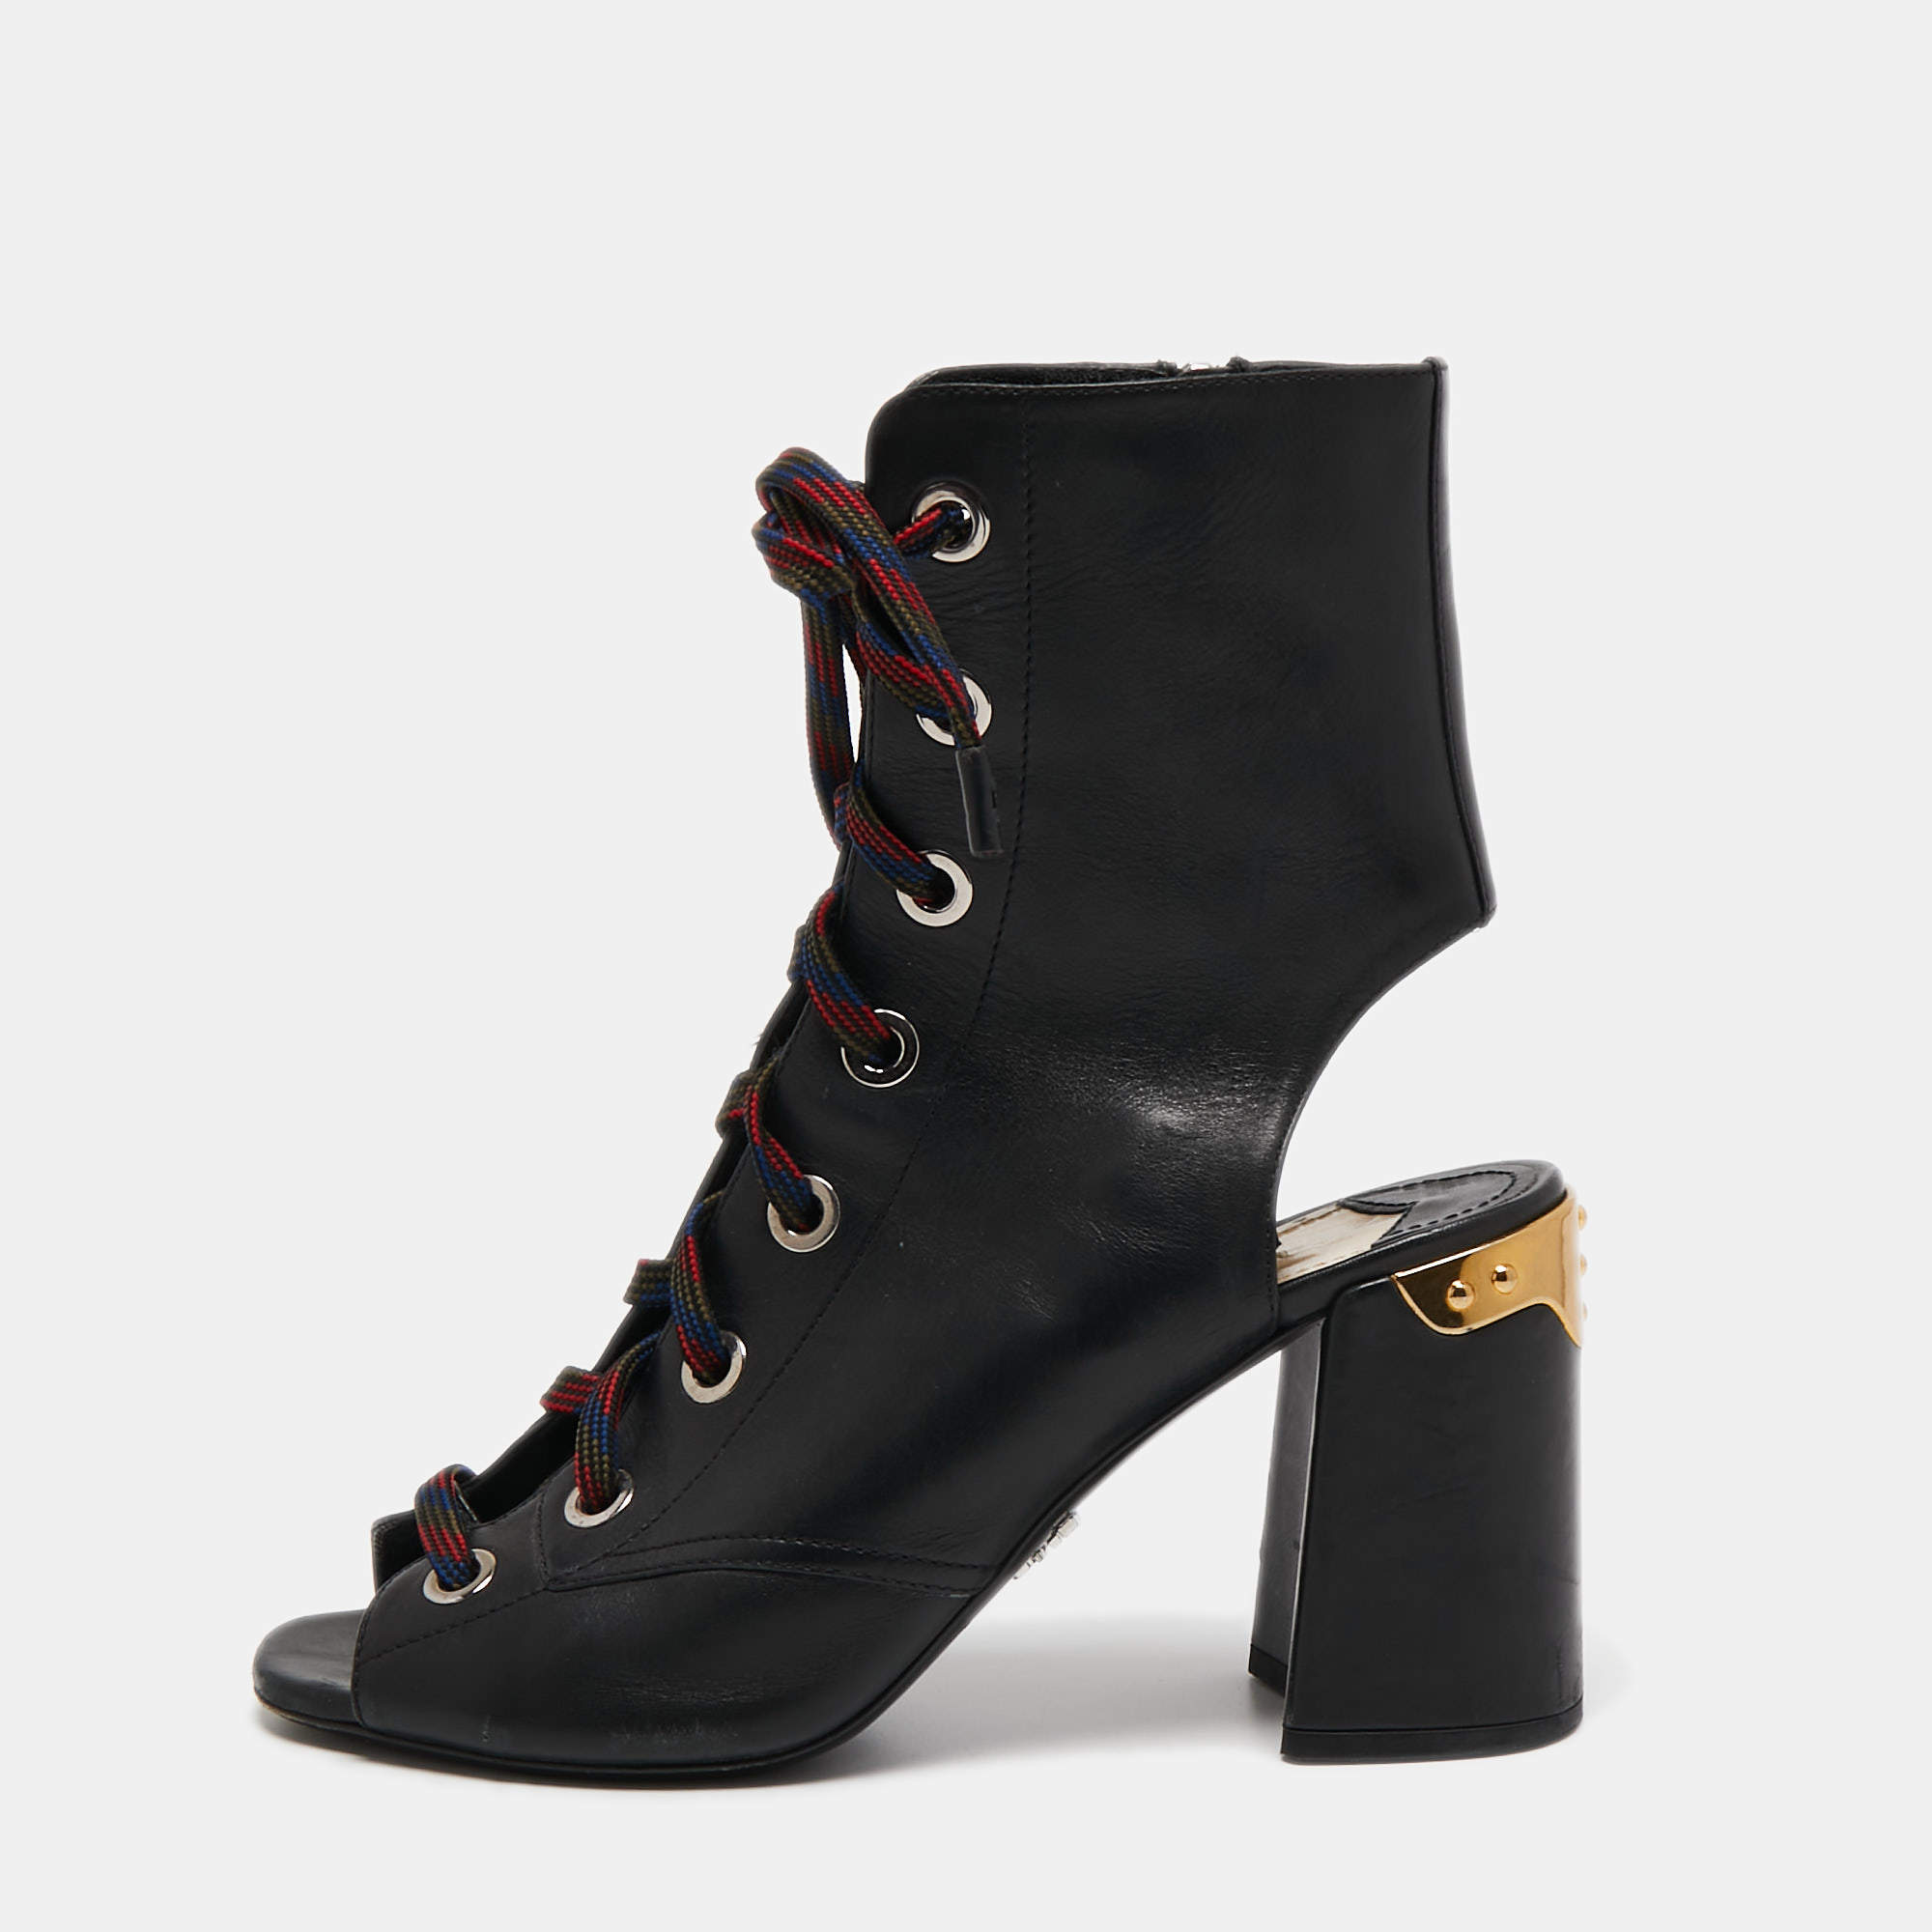 Chic Ankle Appeal: Prada Ankle Boots